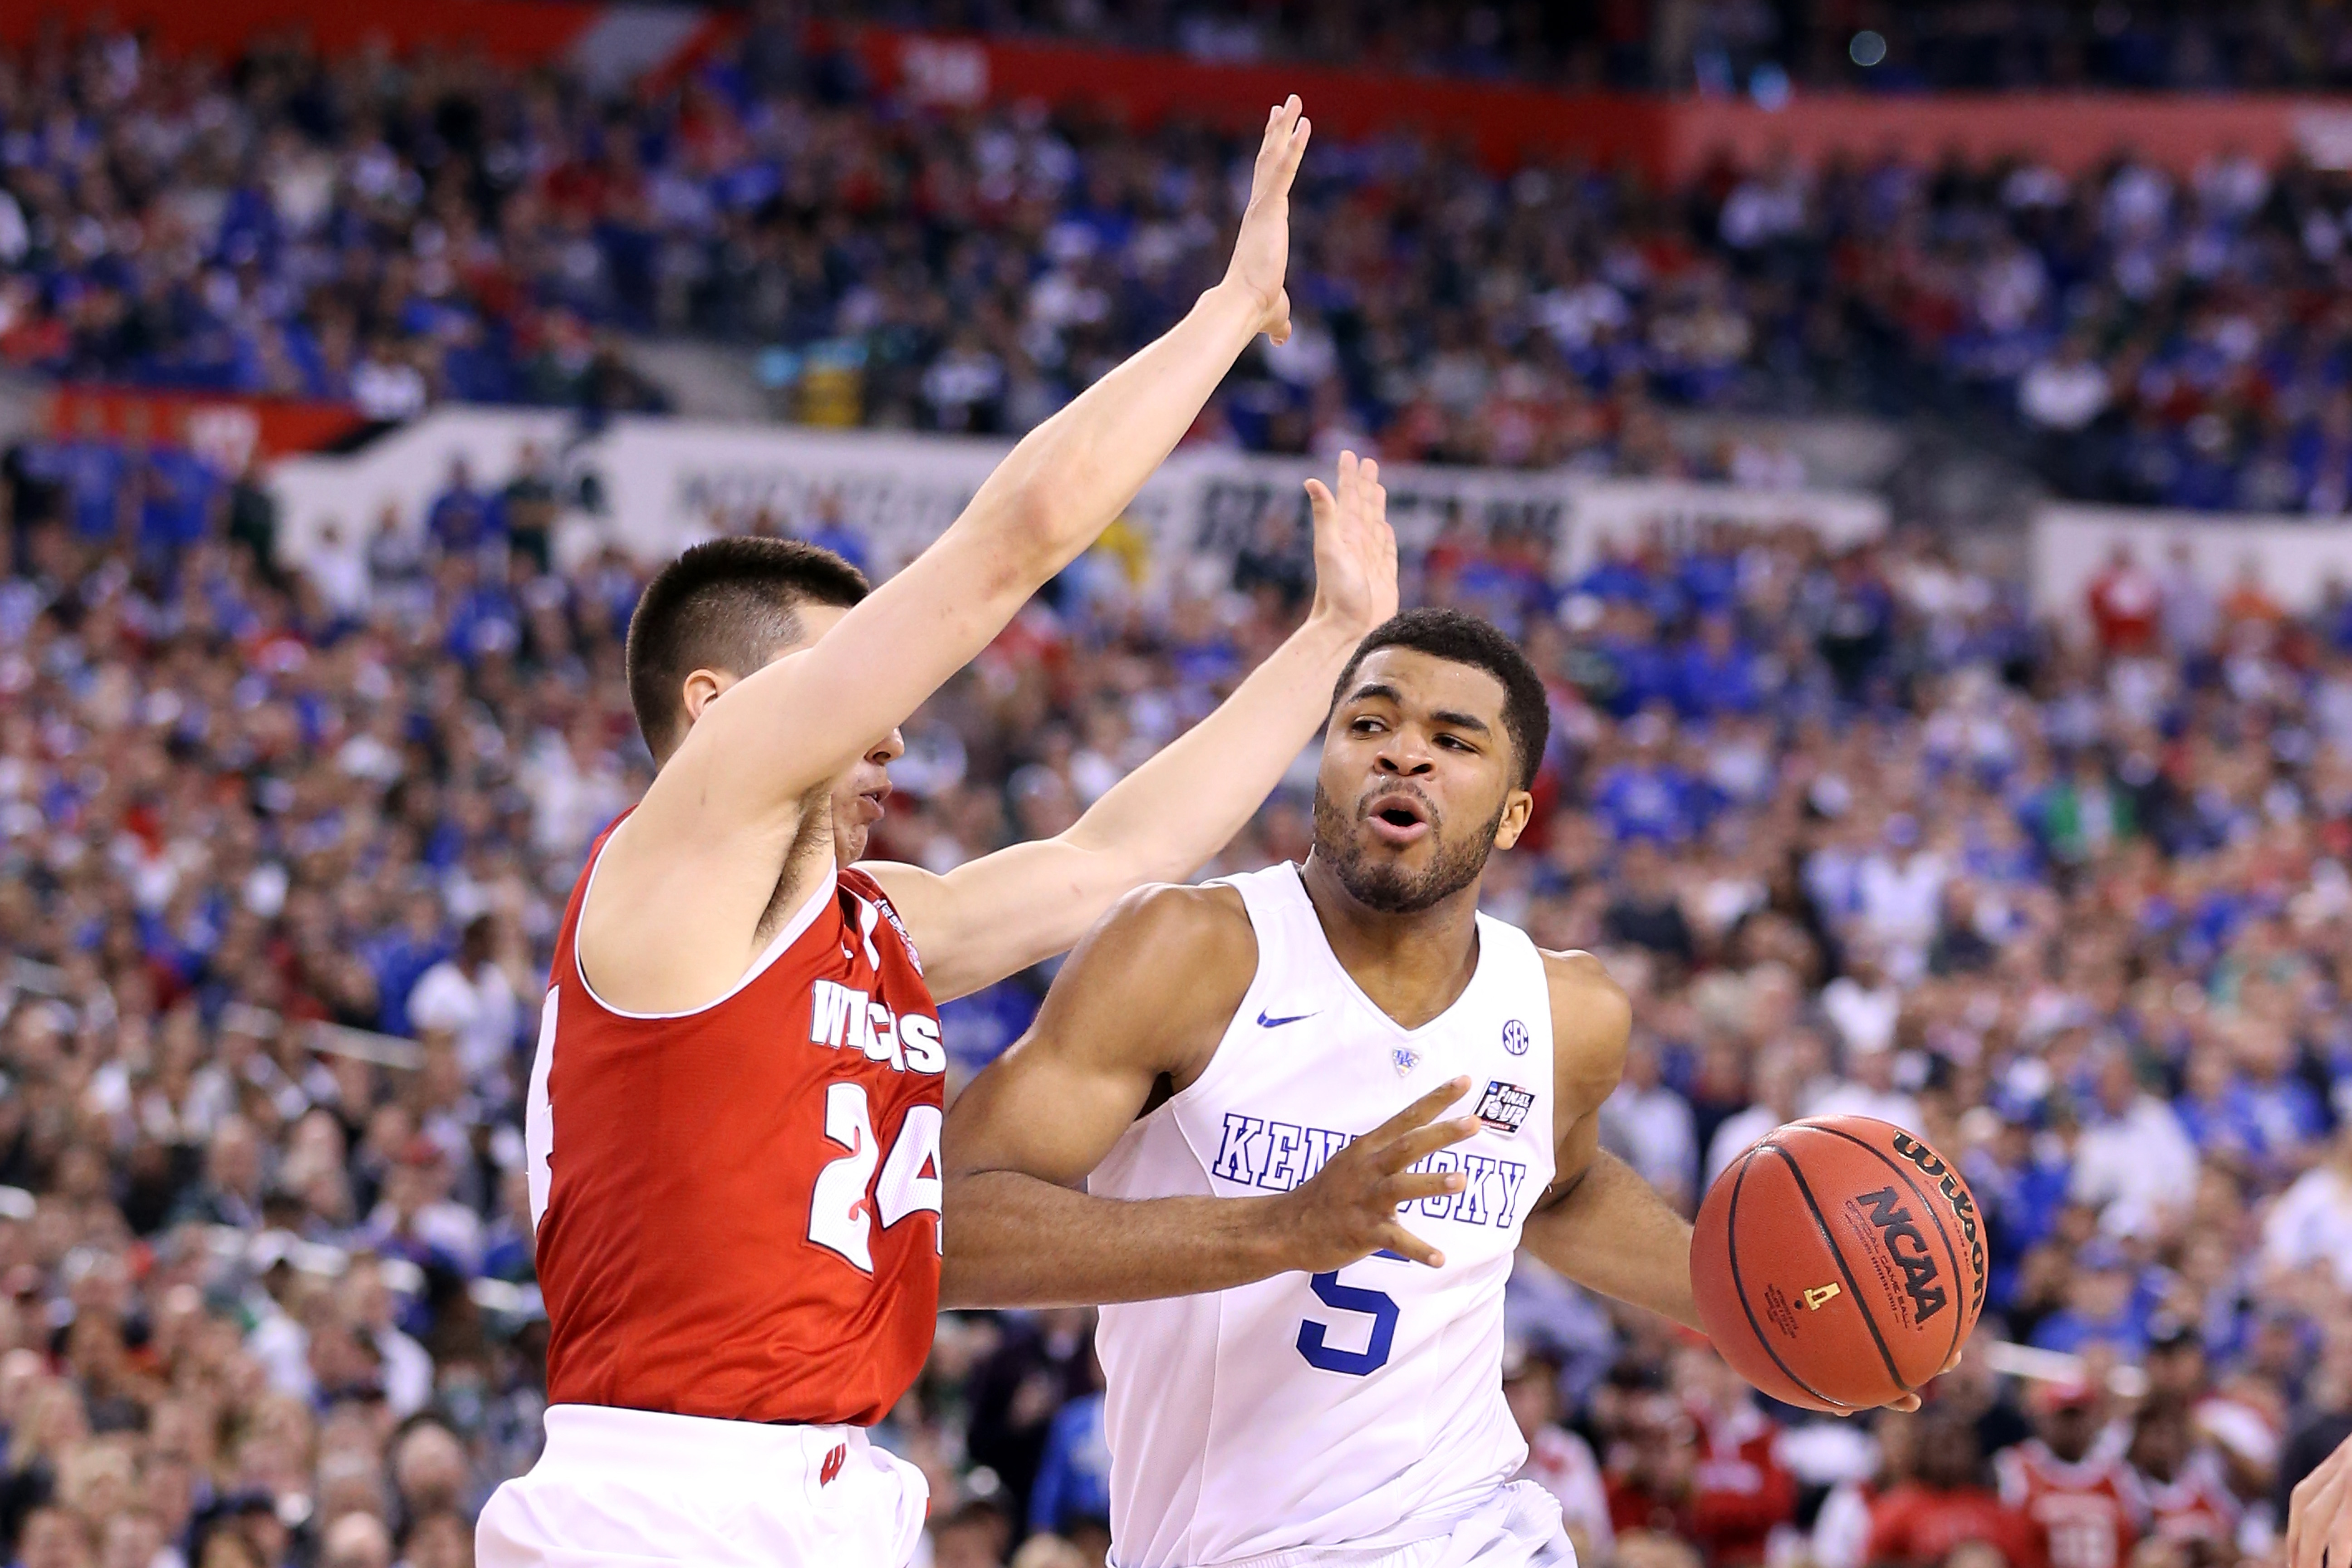 INDIANAPOLIS, IN - APRIL 04: Andrew Harrison #5 of the Kentucky Wildcats handles the ball against Bronson Koenig #24 of the Wisconsin Badgers in the second half during the NCAA Men's Final Four Semifinal at Lucas Oil Stadium on April 4, 2015 in Indianapolis, Indiana.  (Photo by Andy Lyons/Getty Images)